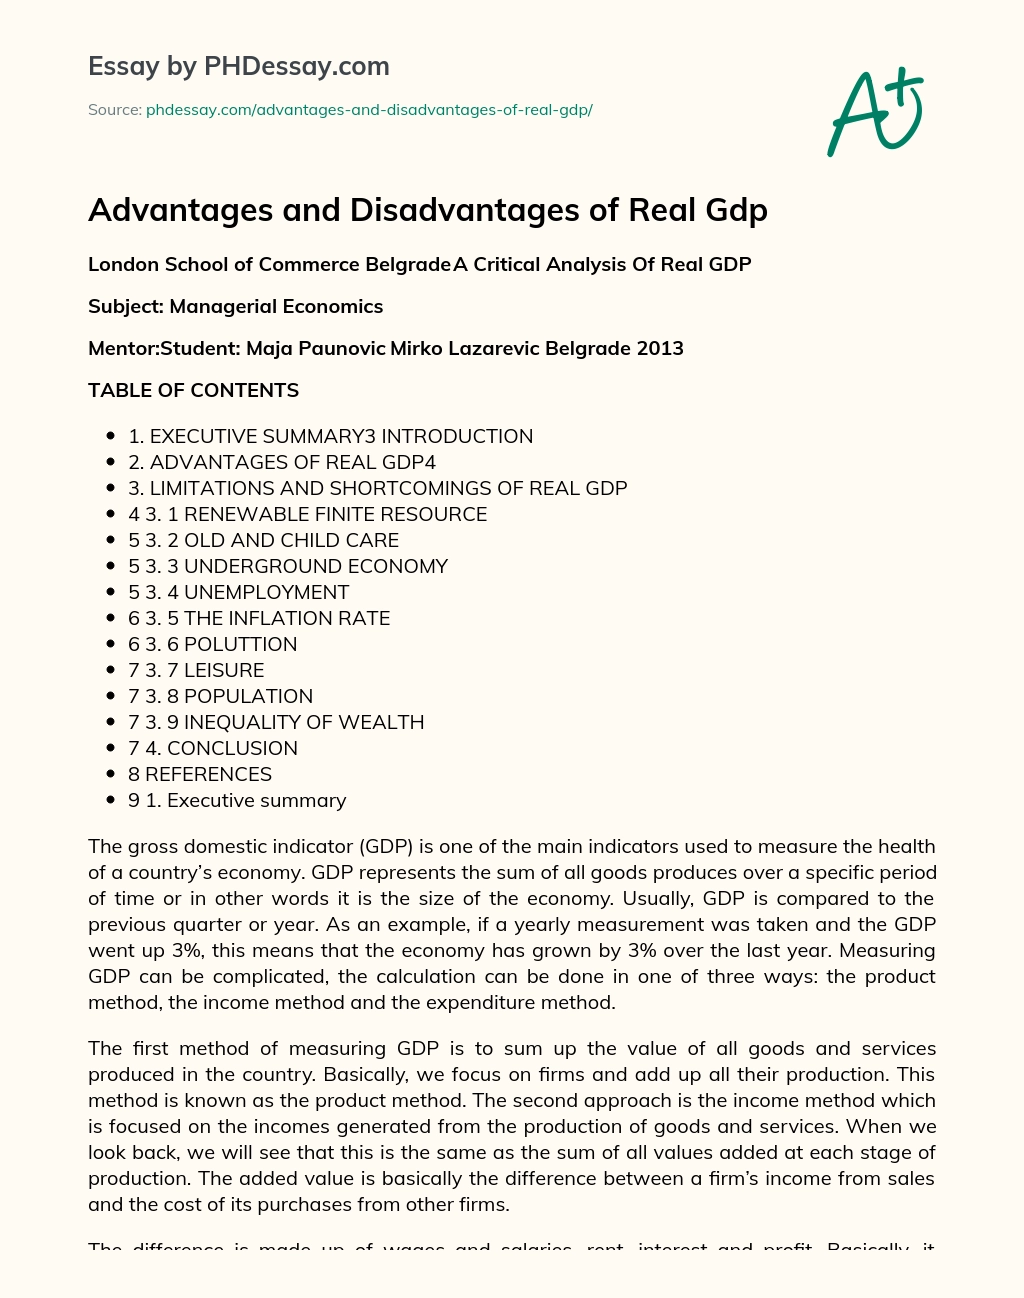 Advantages and Disadvantages of Real Gdp essay